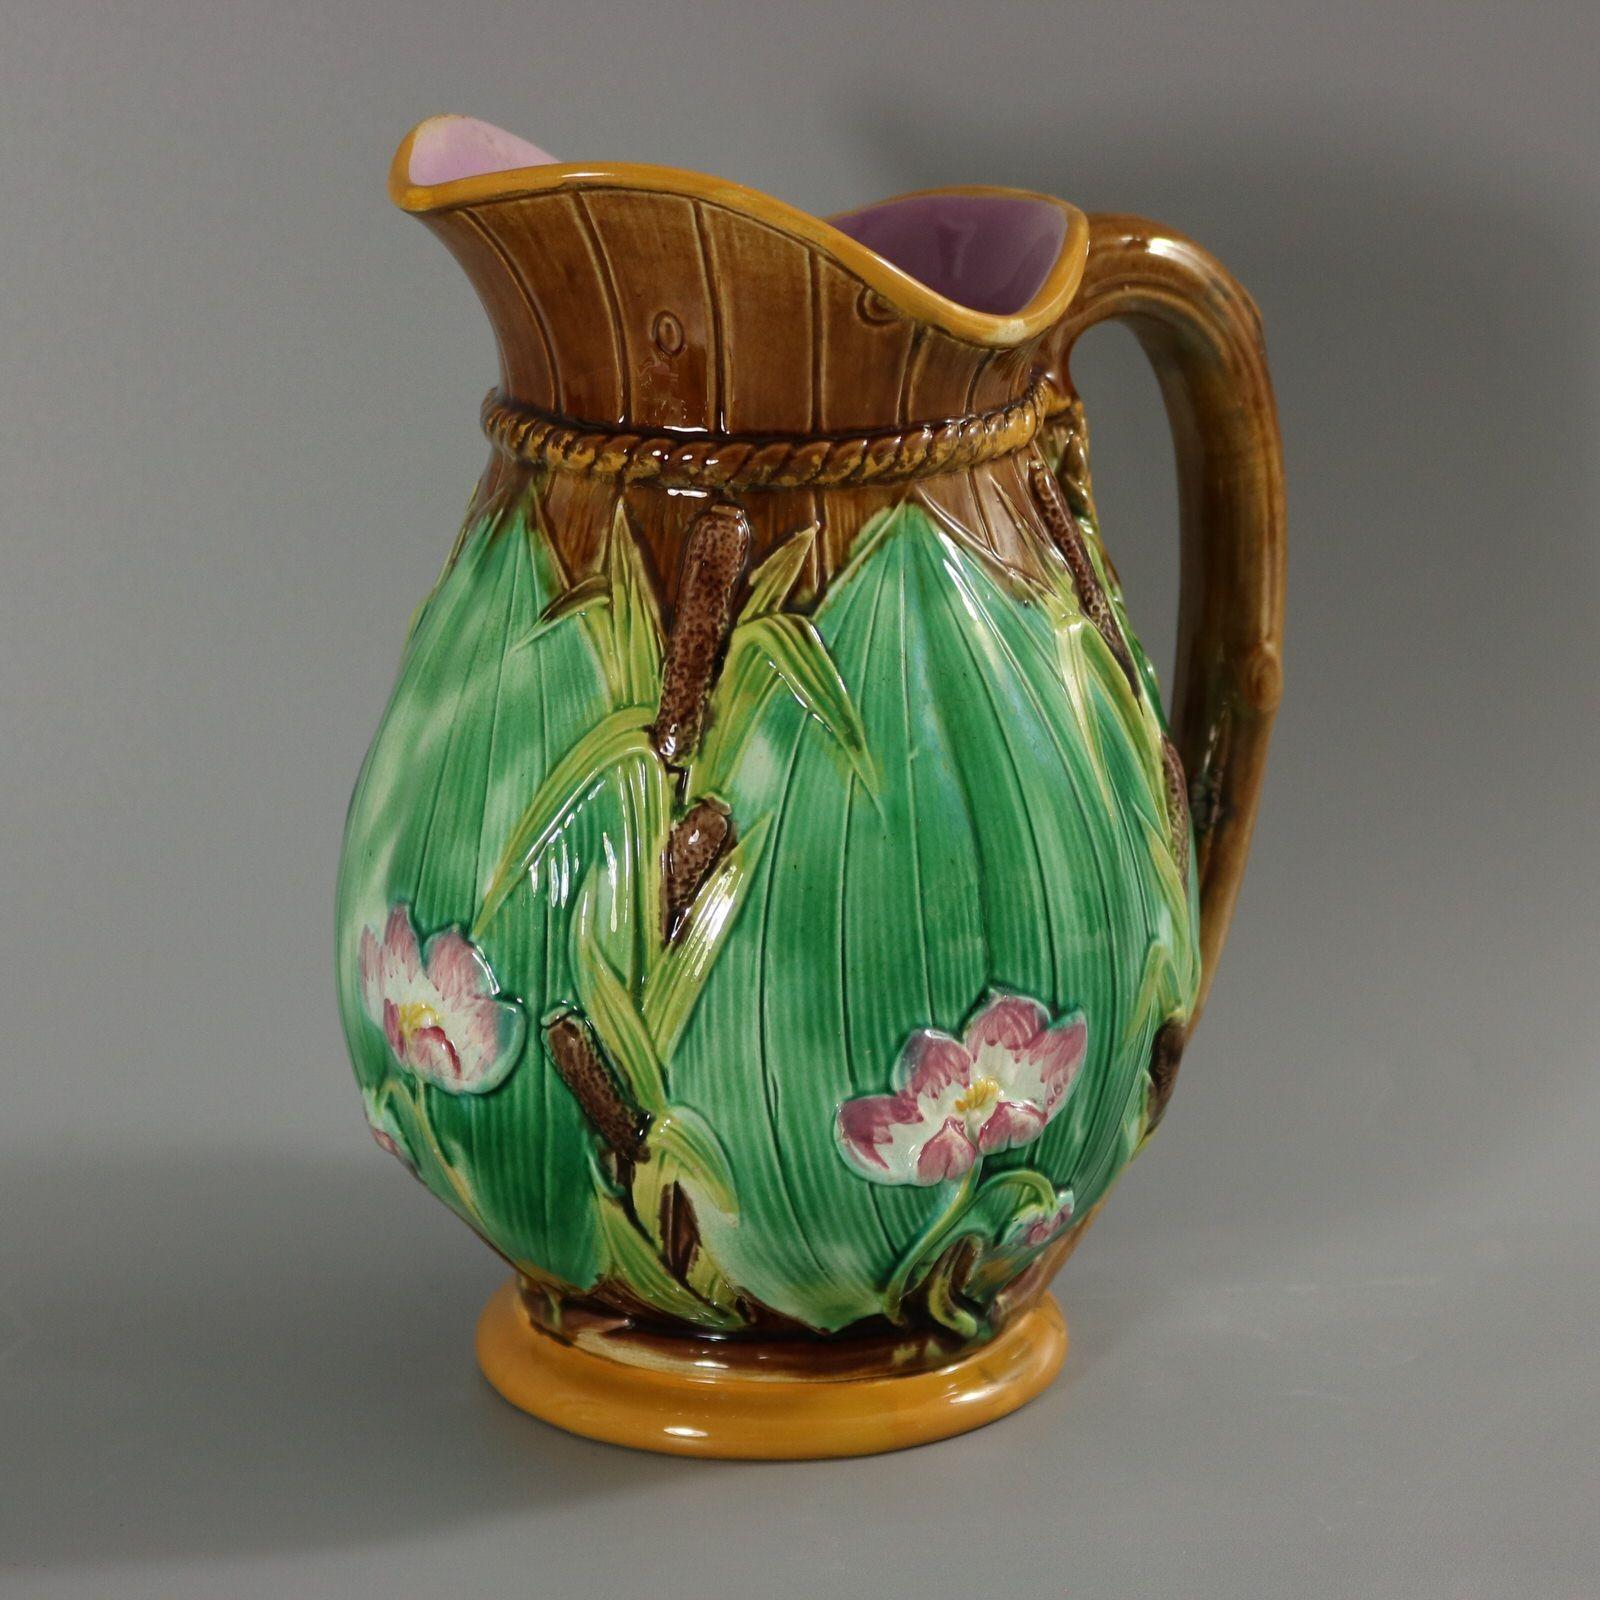 George Jones Majolica jug/pitcher which features green leaves, bulrushes/cattails and water lilies. Brown ground version. Colouration: brown, green, pink, are predominant. Bears a pattern number, '1800 T'.